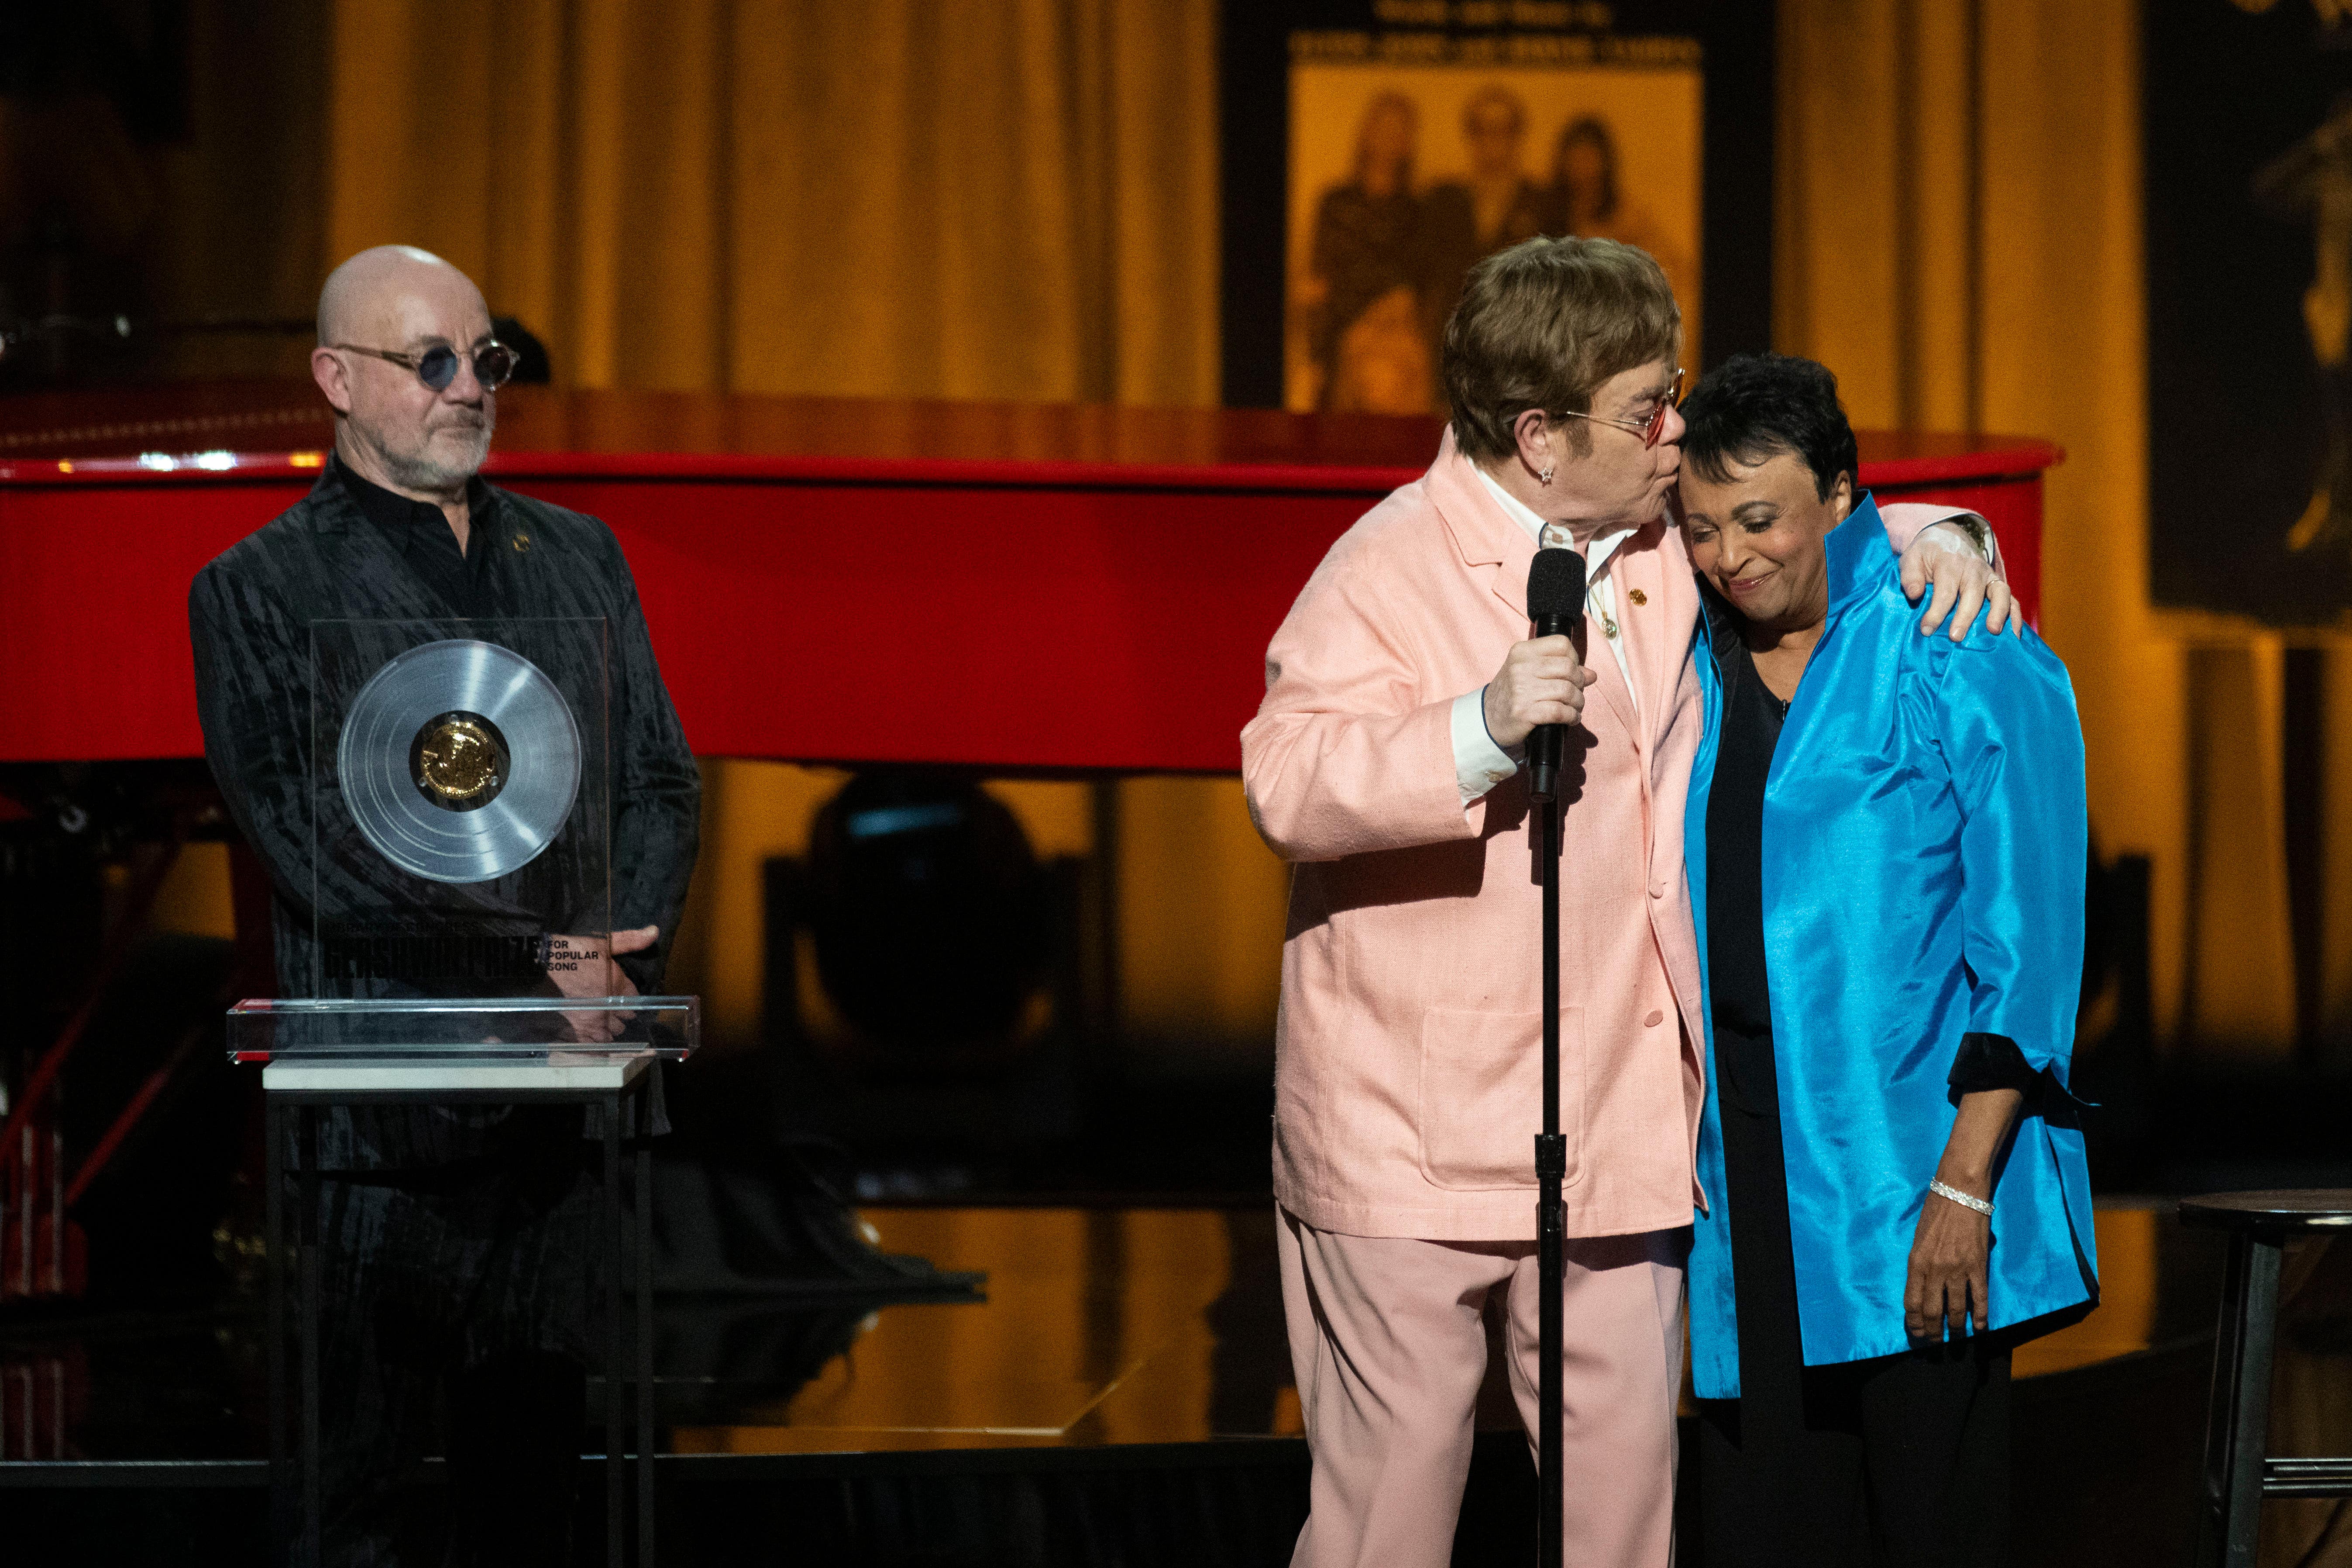 The singer, centre, collected the award together with his songwriting partner Bernie Taupin, left